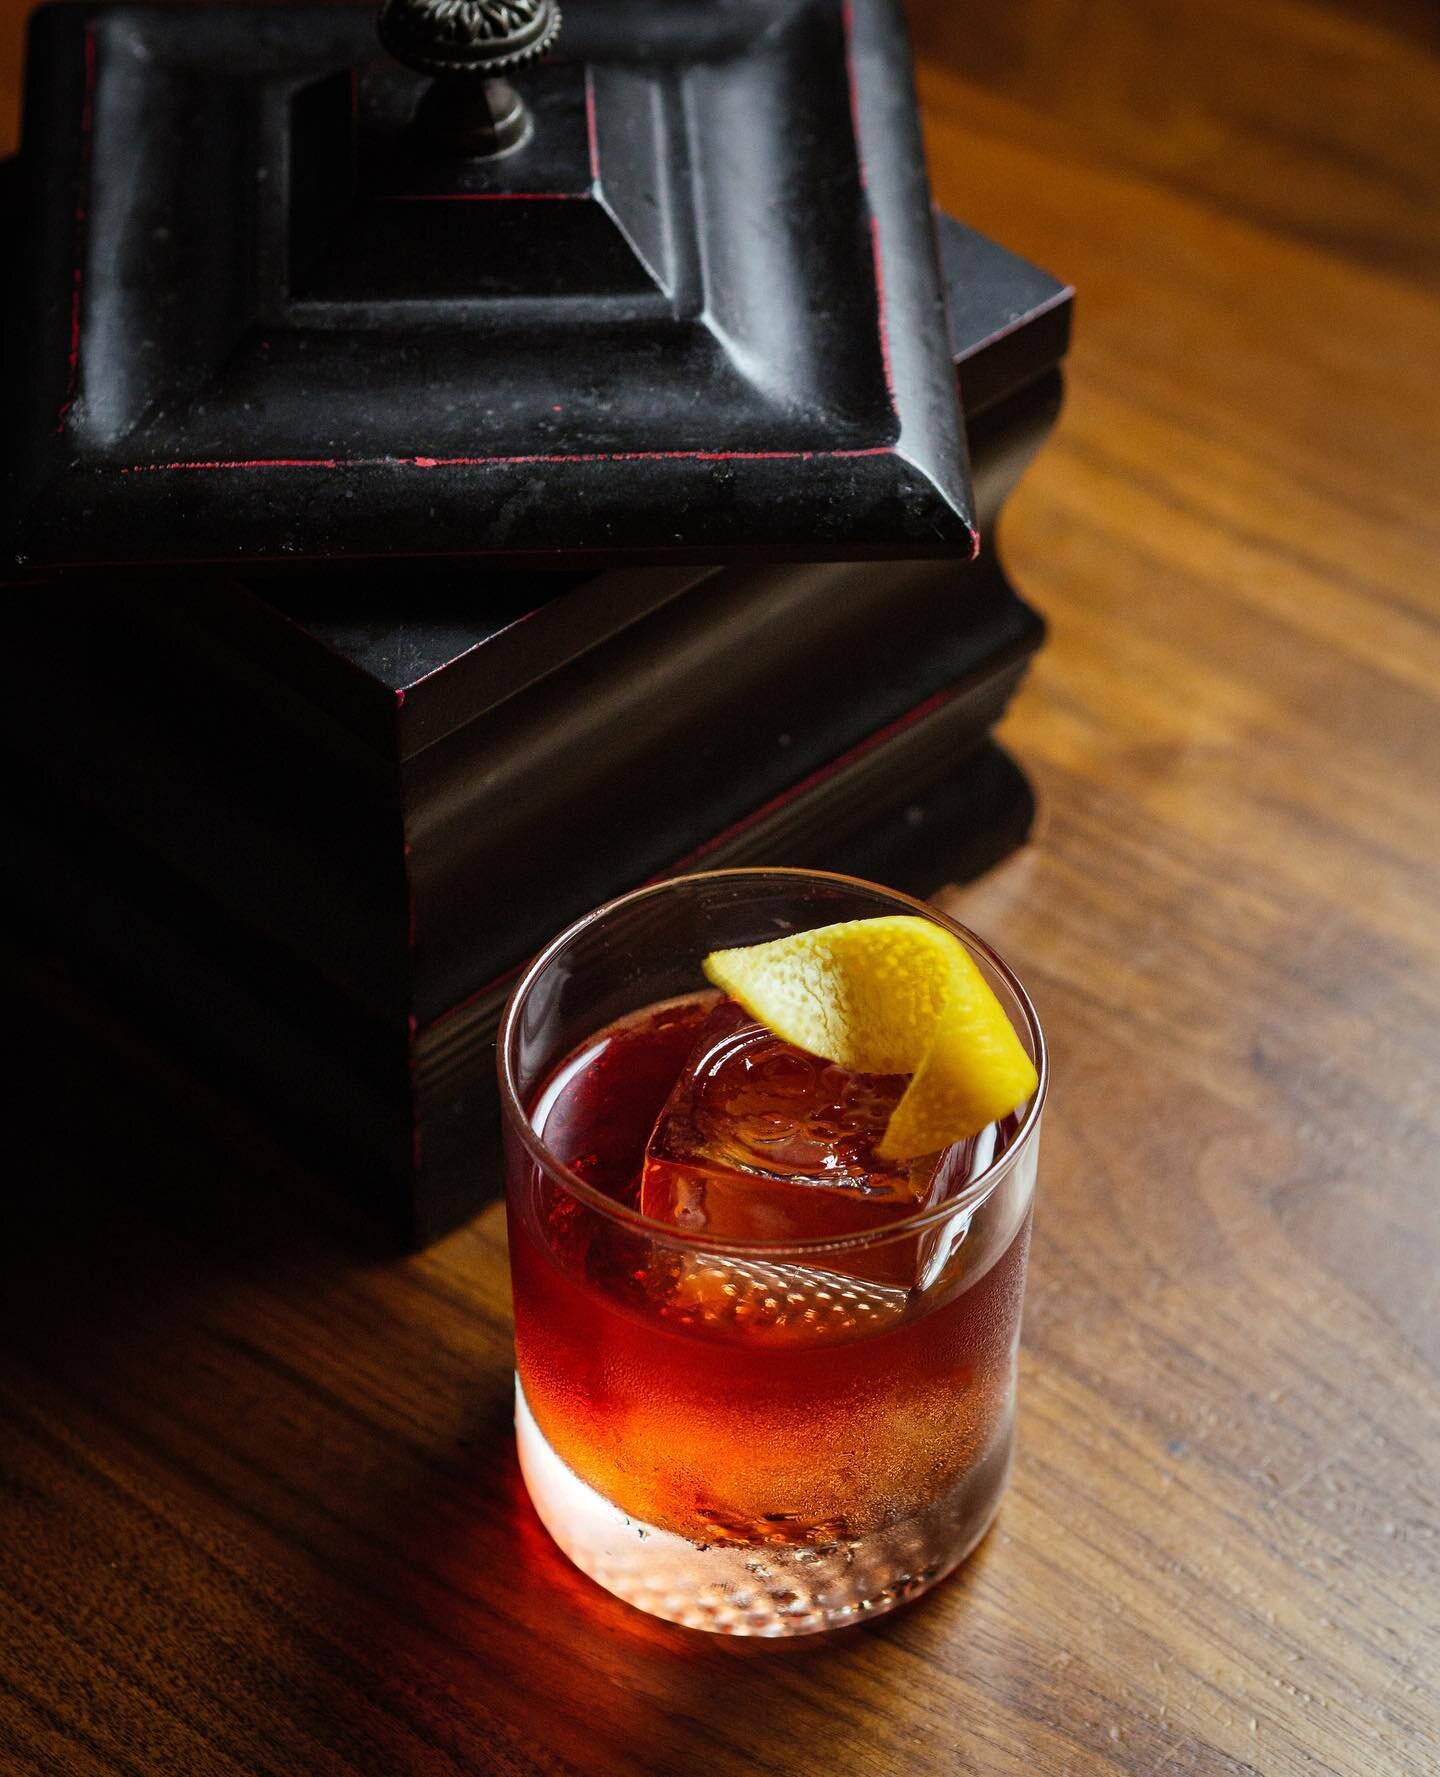 Smoked Rum Negroni, anyone? ⁠
⁠
For those seeking to reawaken their senses through the colder months, we've added another stop on our Negroni World Tour.⁠
⁠
Guatemala | cacao nib infused Ron Zacapa 23, coffee infused Campari, creme de banana, treasur